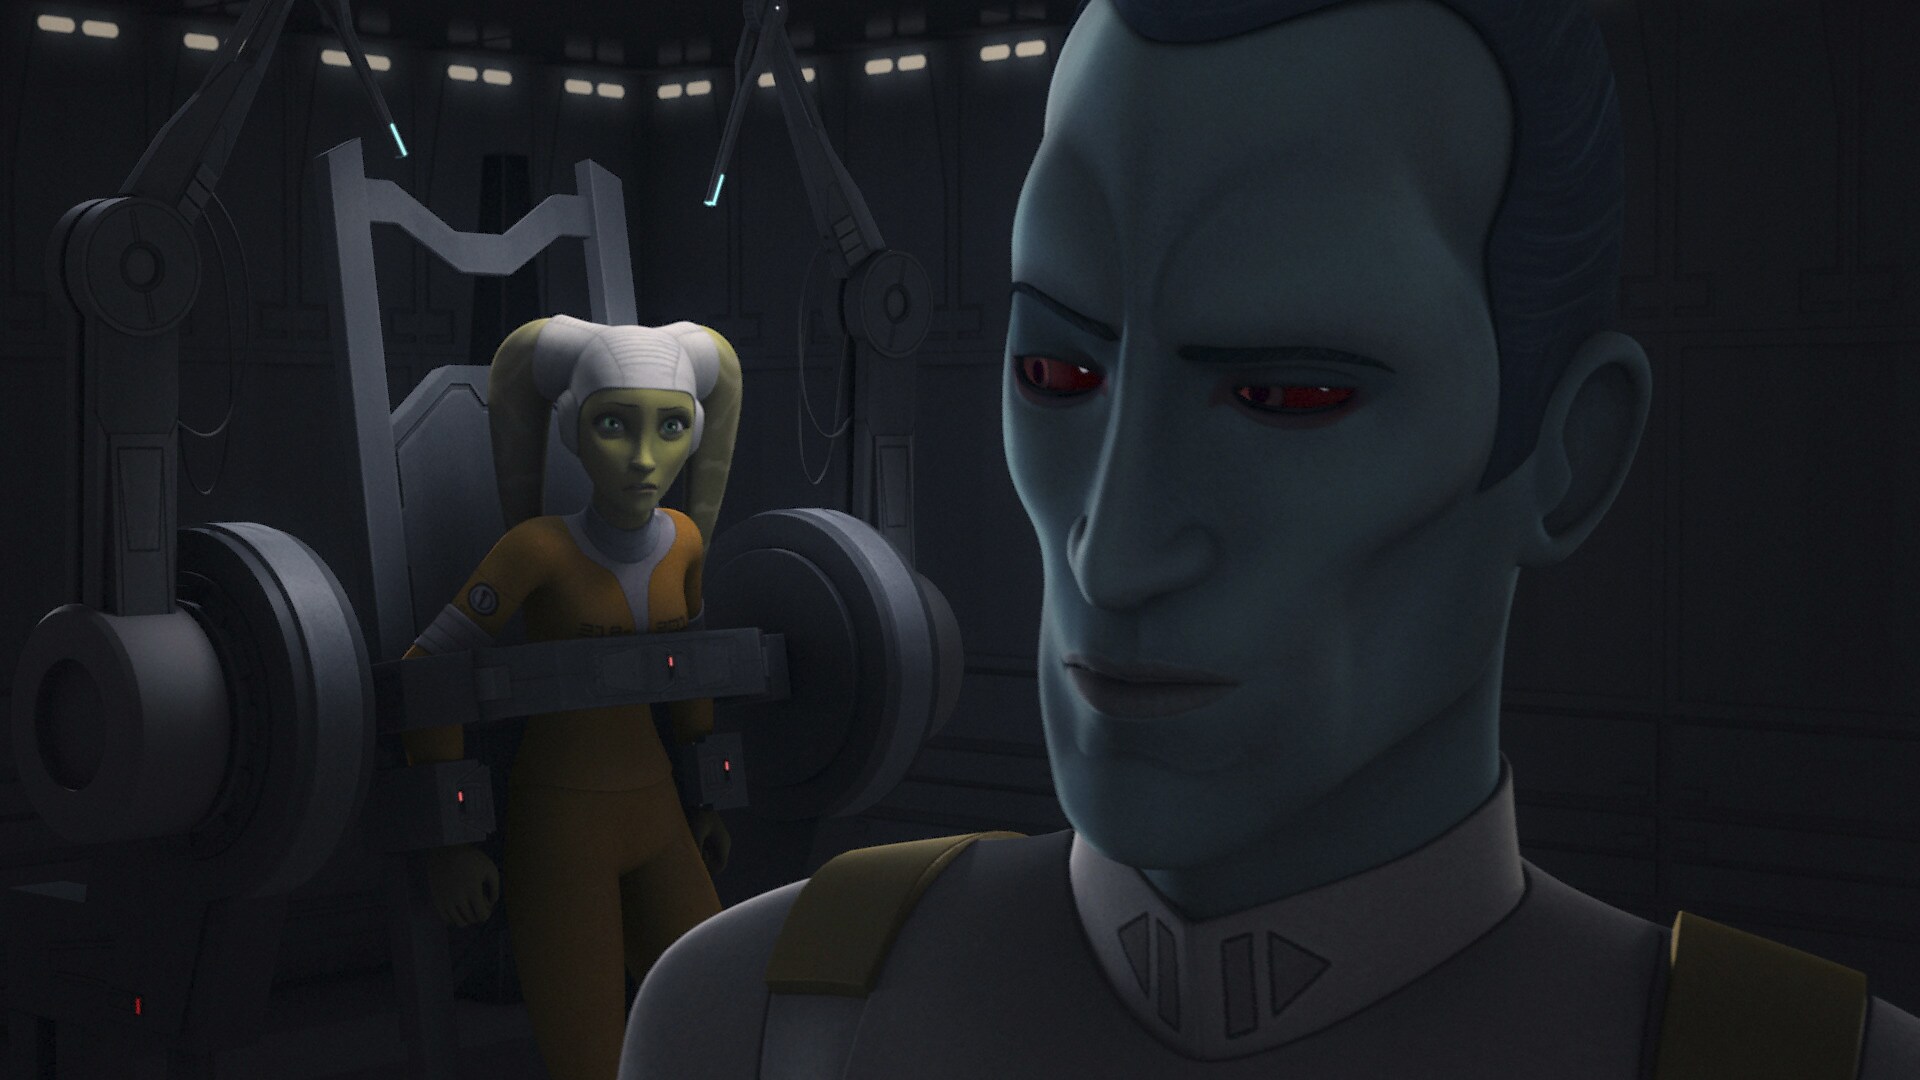 Although Thrawn was able to capture Syndulla after her ship crashed behind enemy lines, she was rescued by her team.